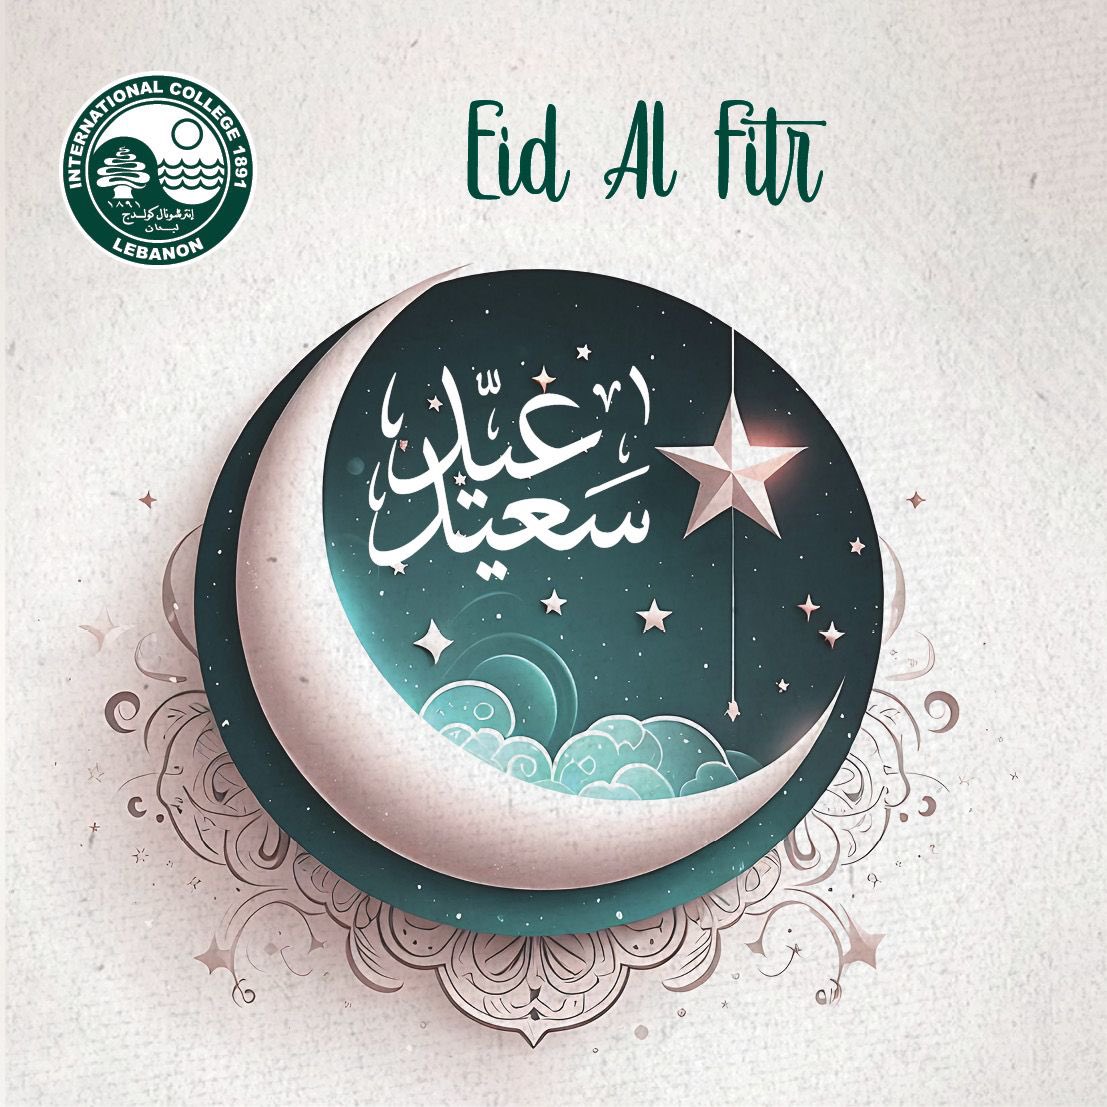 May this auspicious occasion of Eid, bless you and your families with peace, and bring joy to your hearts. Eid Mubarak!